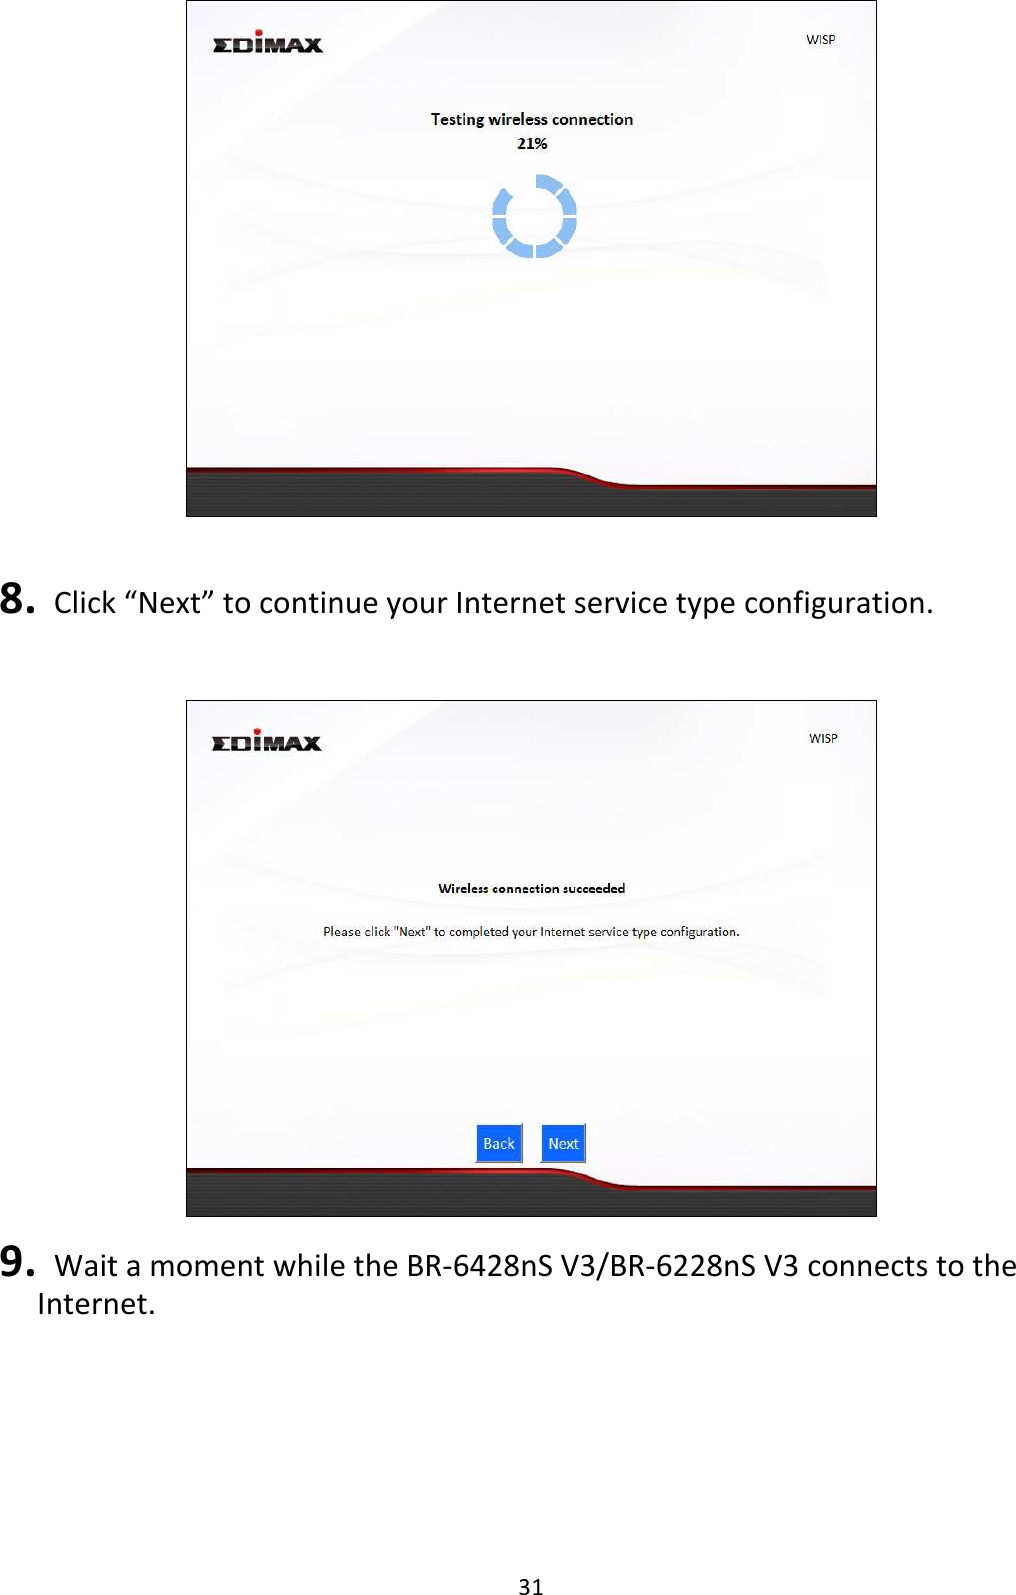 31    8.   Click “Next” to continue your Internet service type configuration.     9.   Wait a moment while the BR-6428nS V3/BR-6228nS V3 connects to the Internet.  